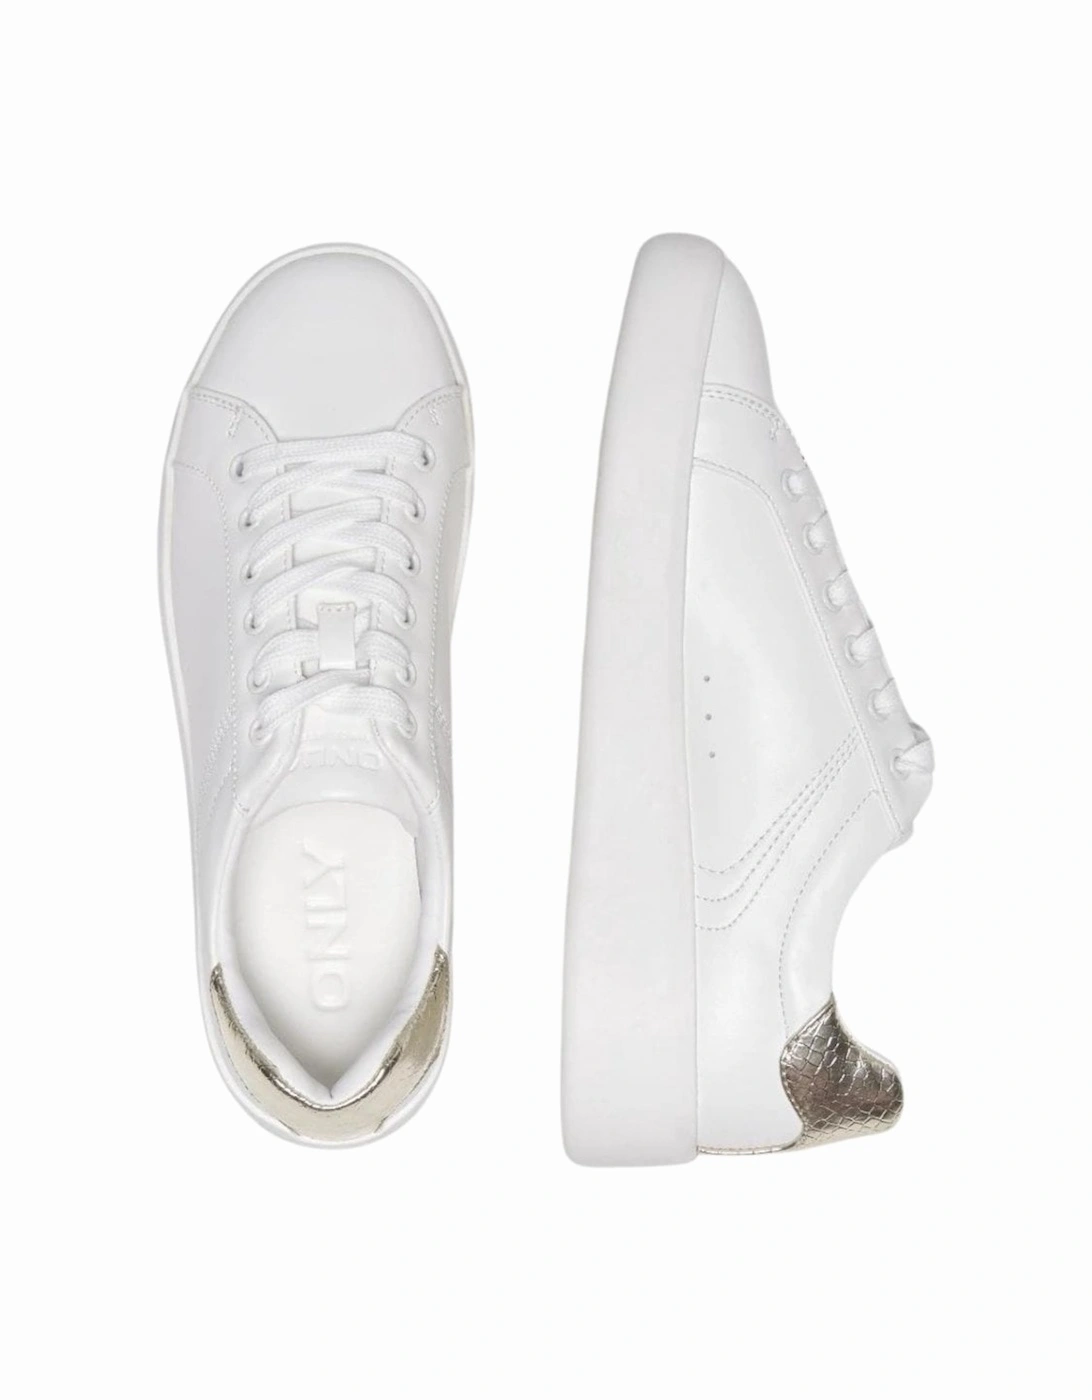 Soul-4 Flux Leather Trainers - White / Gold